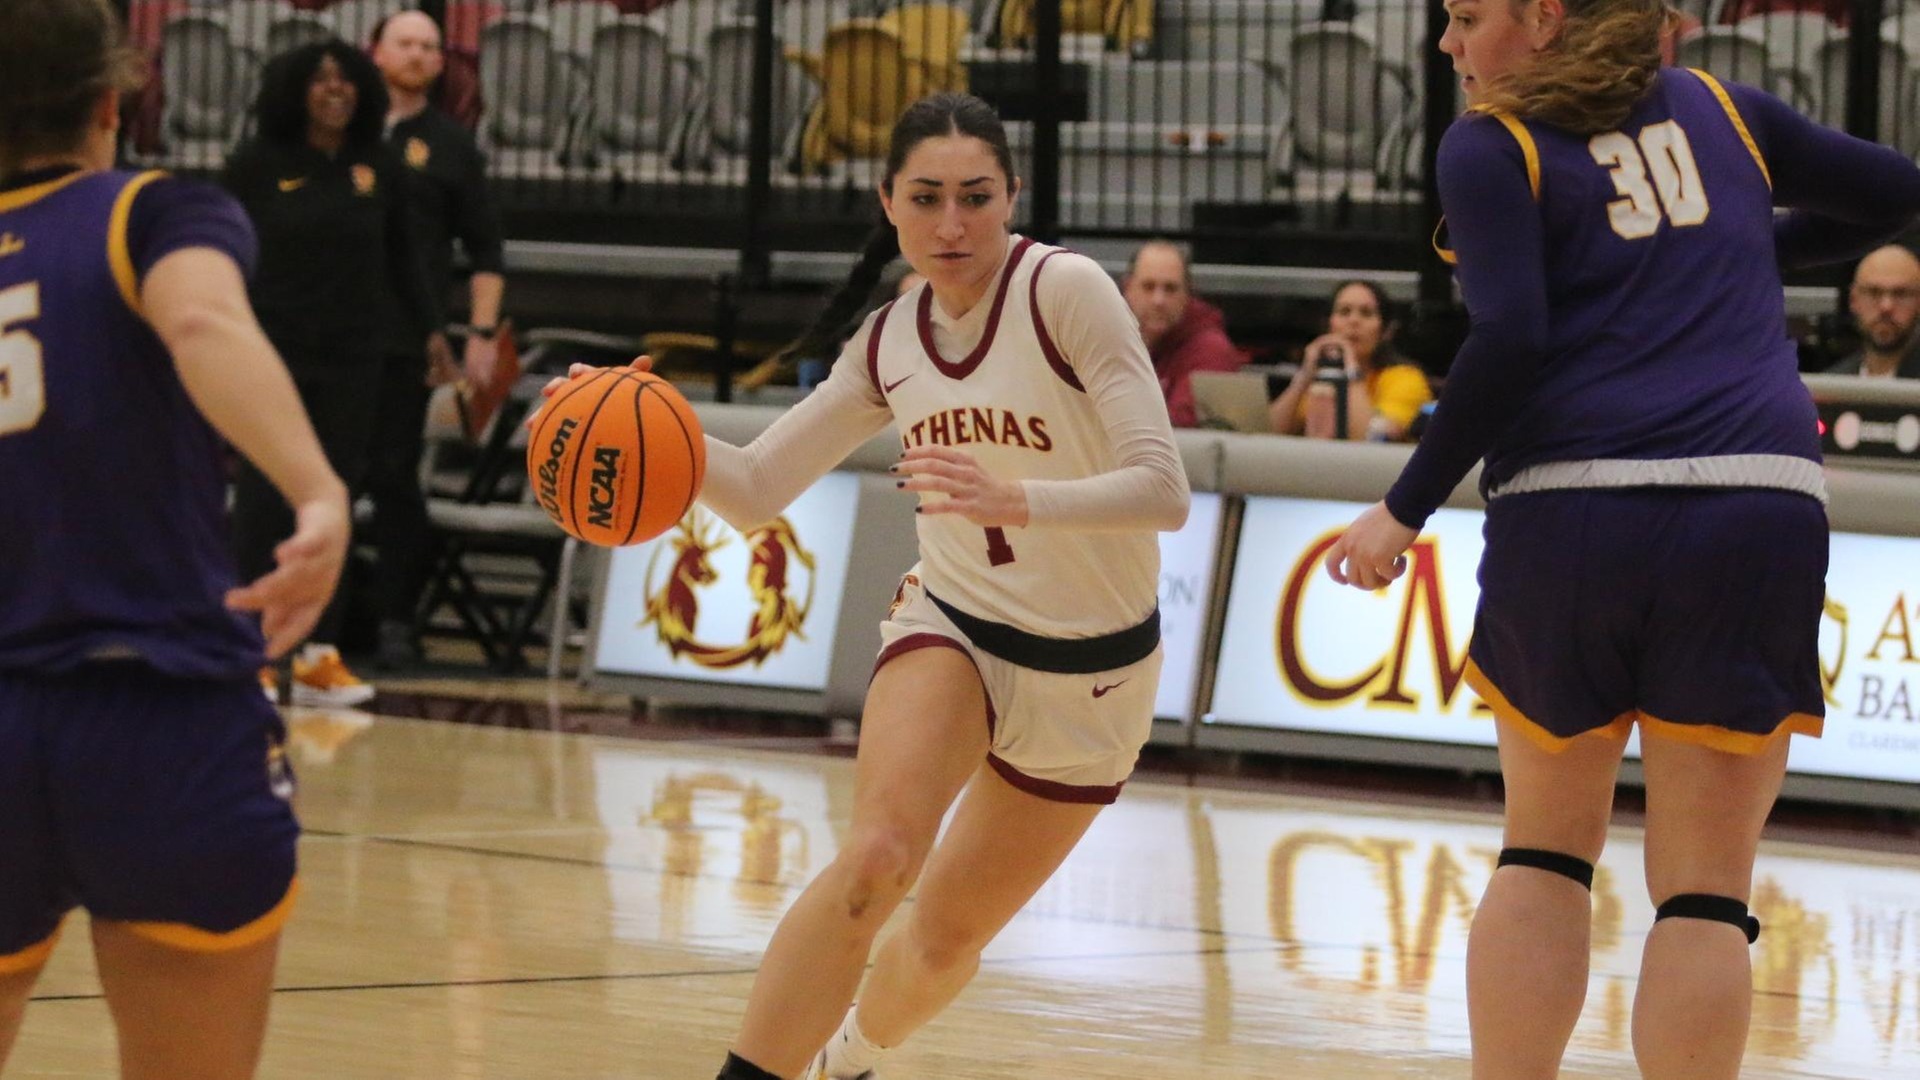 Mary Markaryan led CMS with 20 points and nine rebounds.